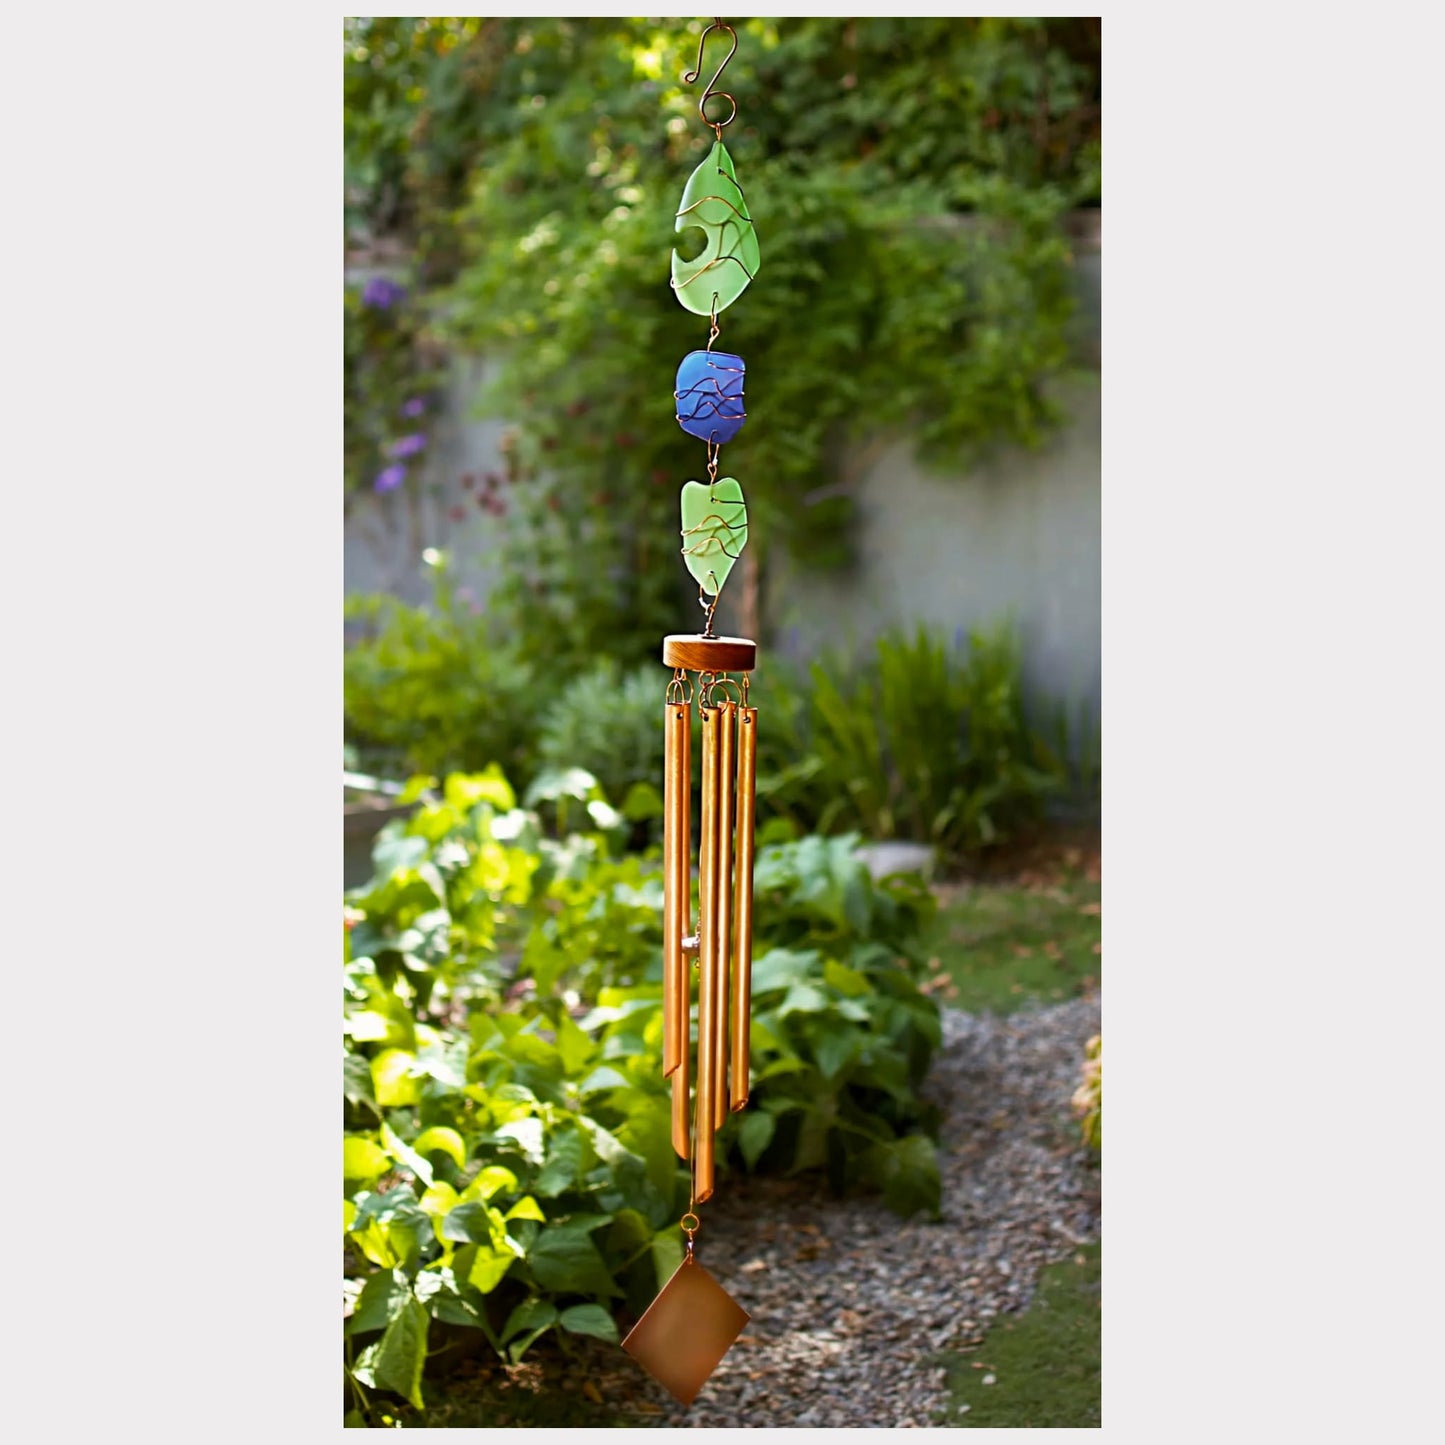 Large handcrafted sea glass wind chime with copper chimes.